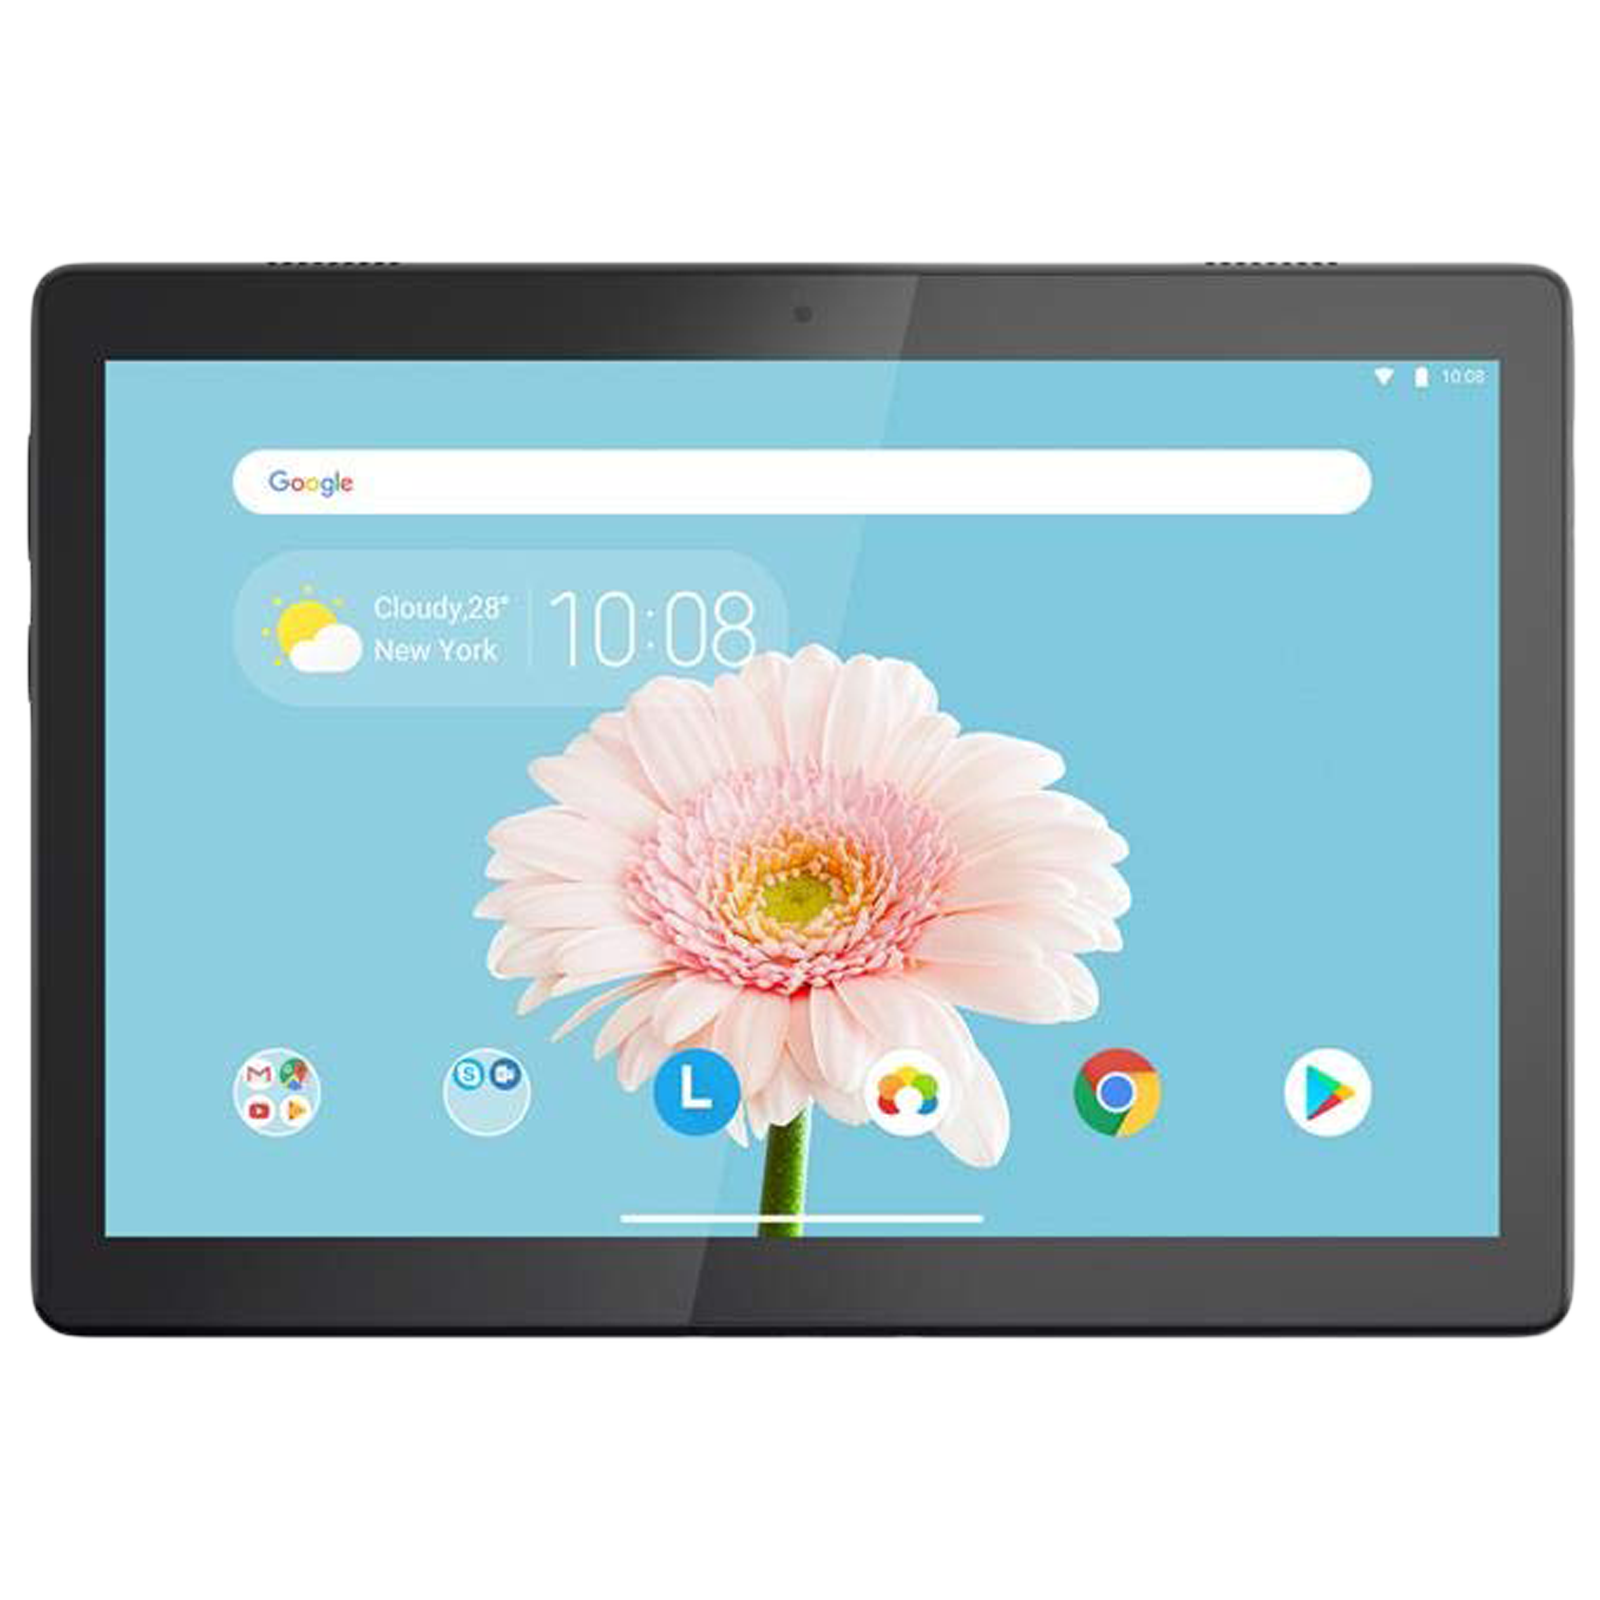 Lenovo Tab M10 REL WiFi + 4G Android Tablet (Android 9.0 Pie, Qualcomm Snapdragon 450, 25.65 cm (10.1 Inches), 4GB RAM, 64GB ROM, ZA500125IN, Slate Black)_1